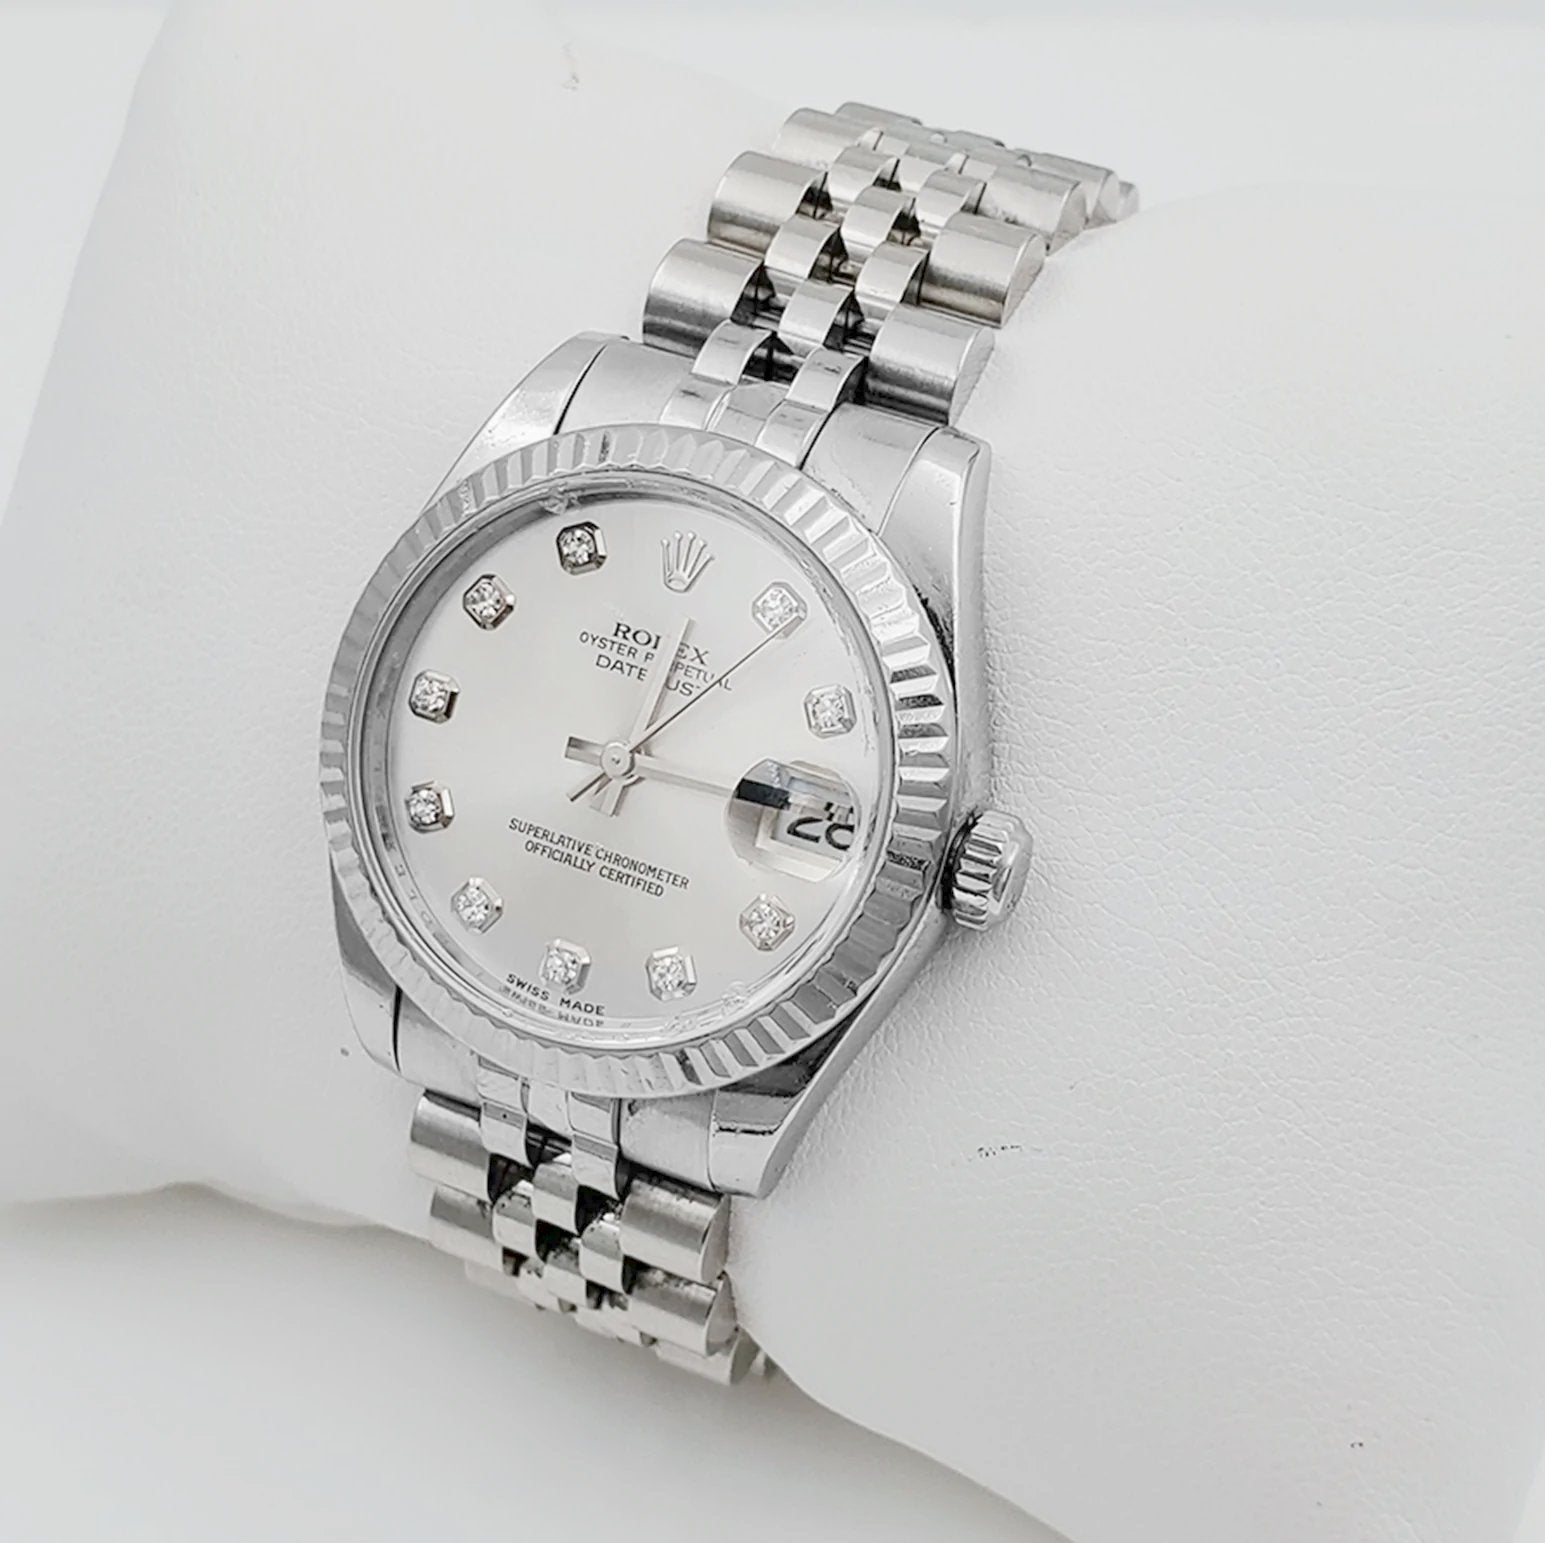 Unisex Midsize Rolex DateJust 31mm Stainless Steel Wristwatch w/ Silver Diamond Dial & Fluted Bezel. (Pre-Owned)